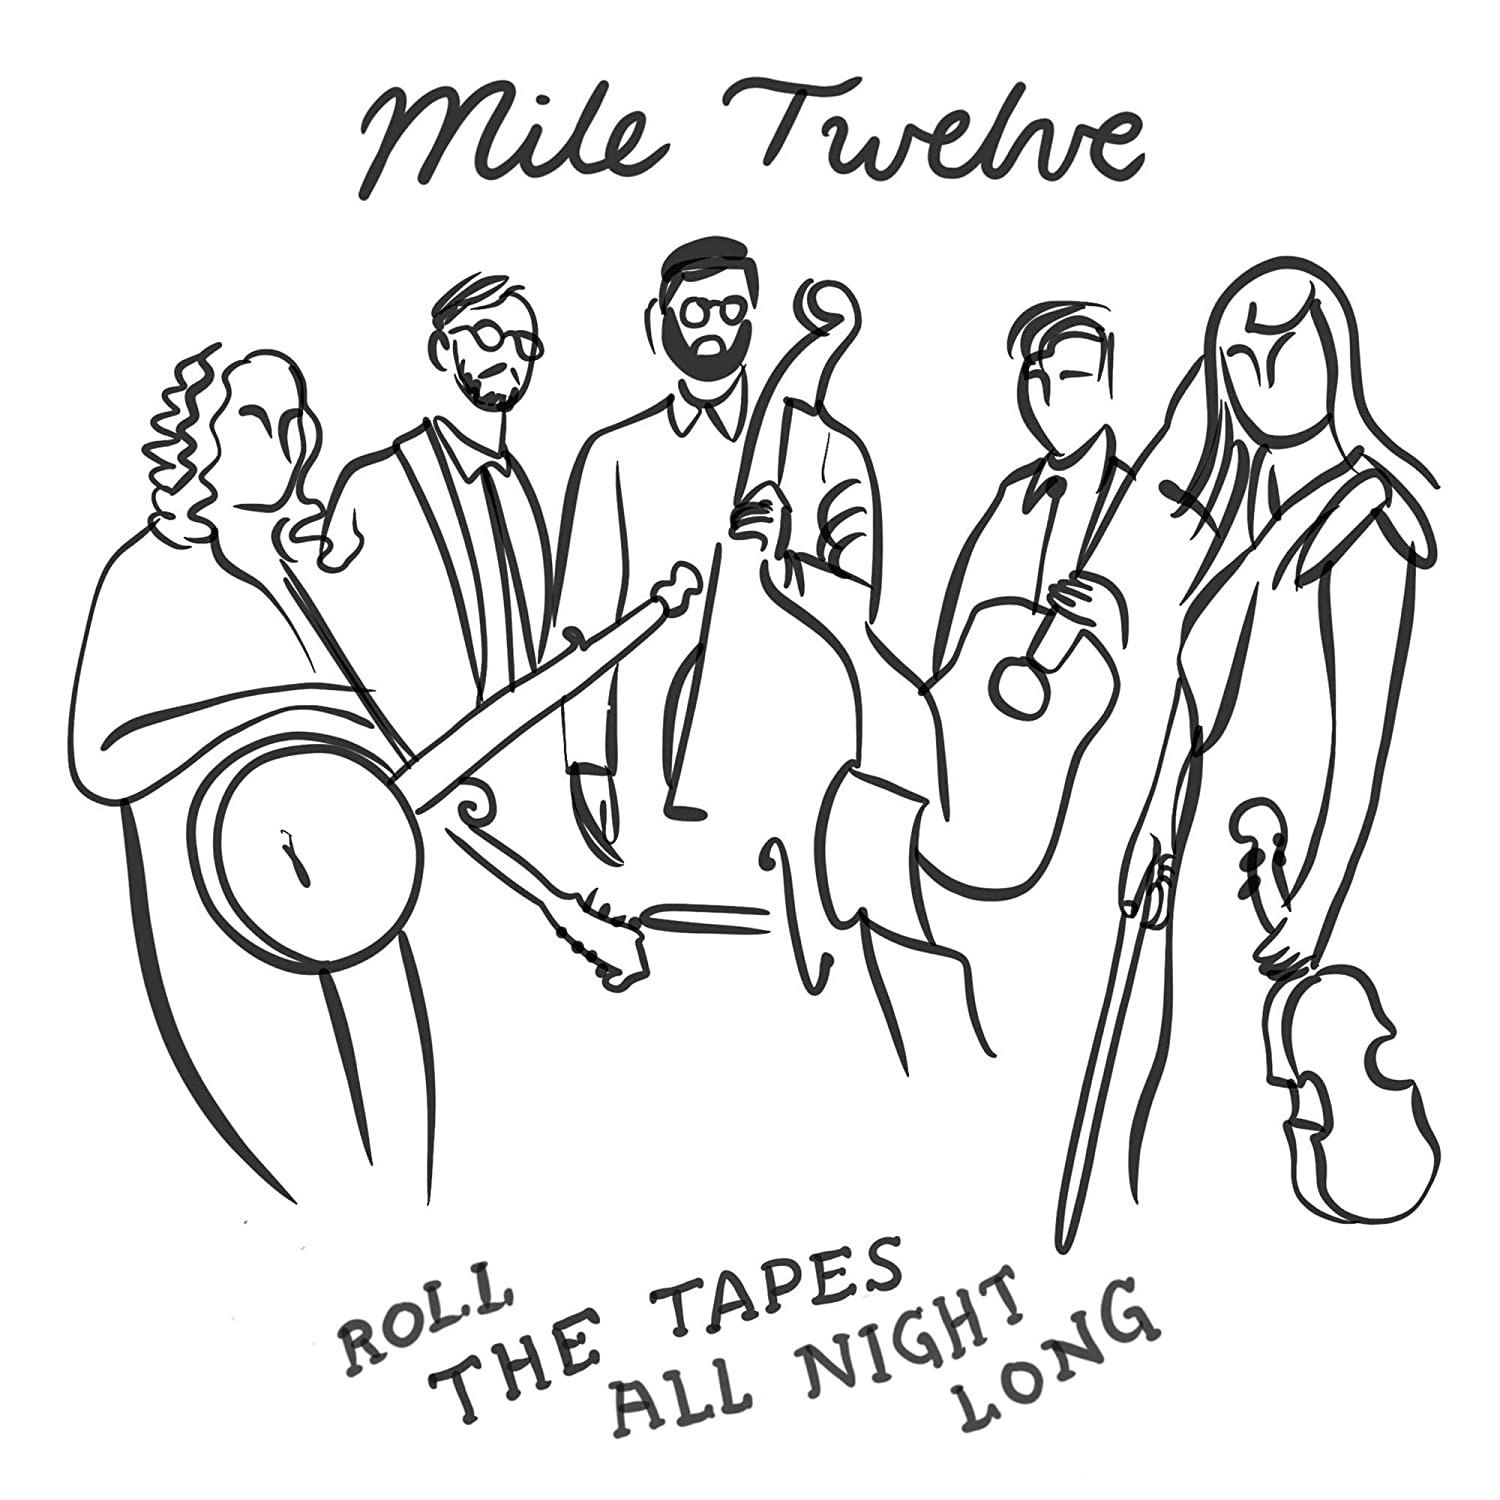 CD Shop - MILE TWELVE ROLL THE TAPES ALL NIGHT LONG